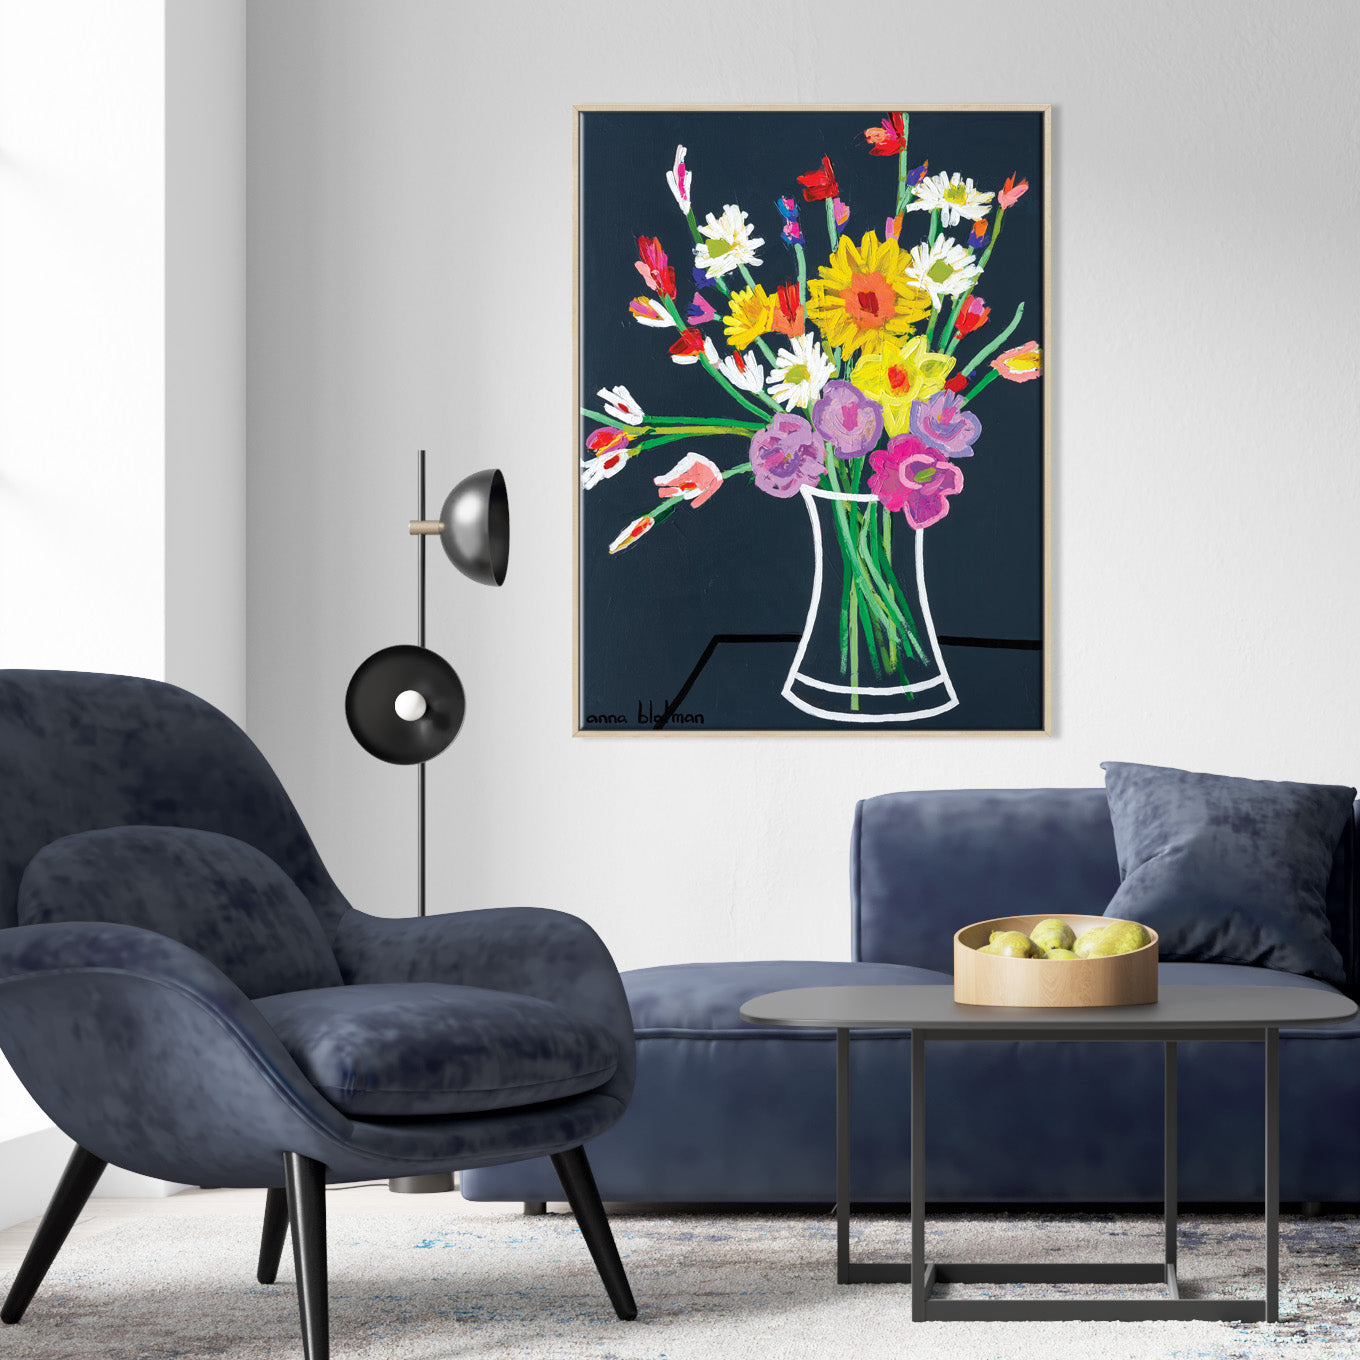 Ana - Gallery Wrapped Canvas